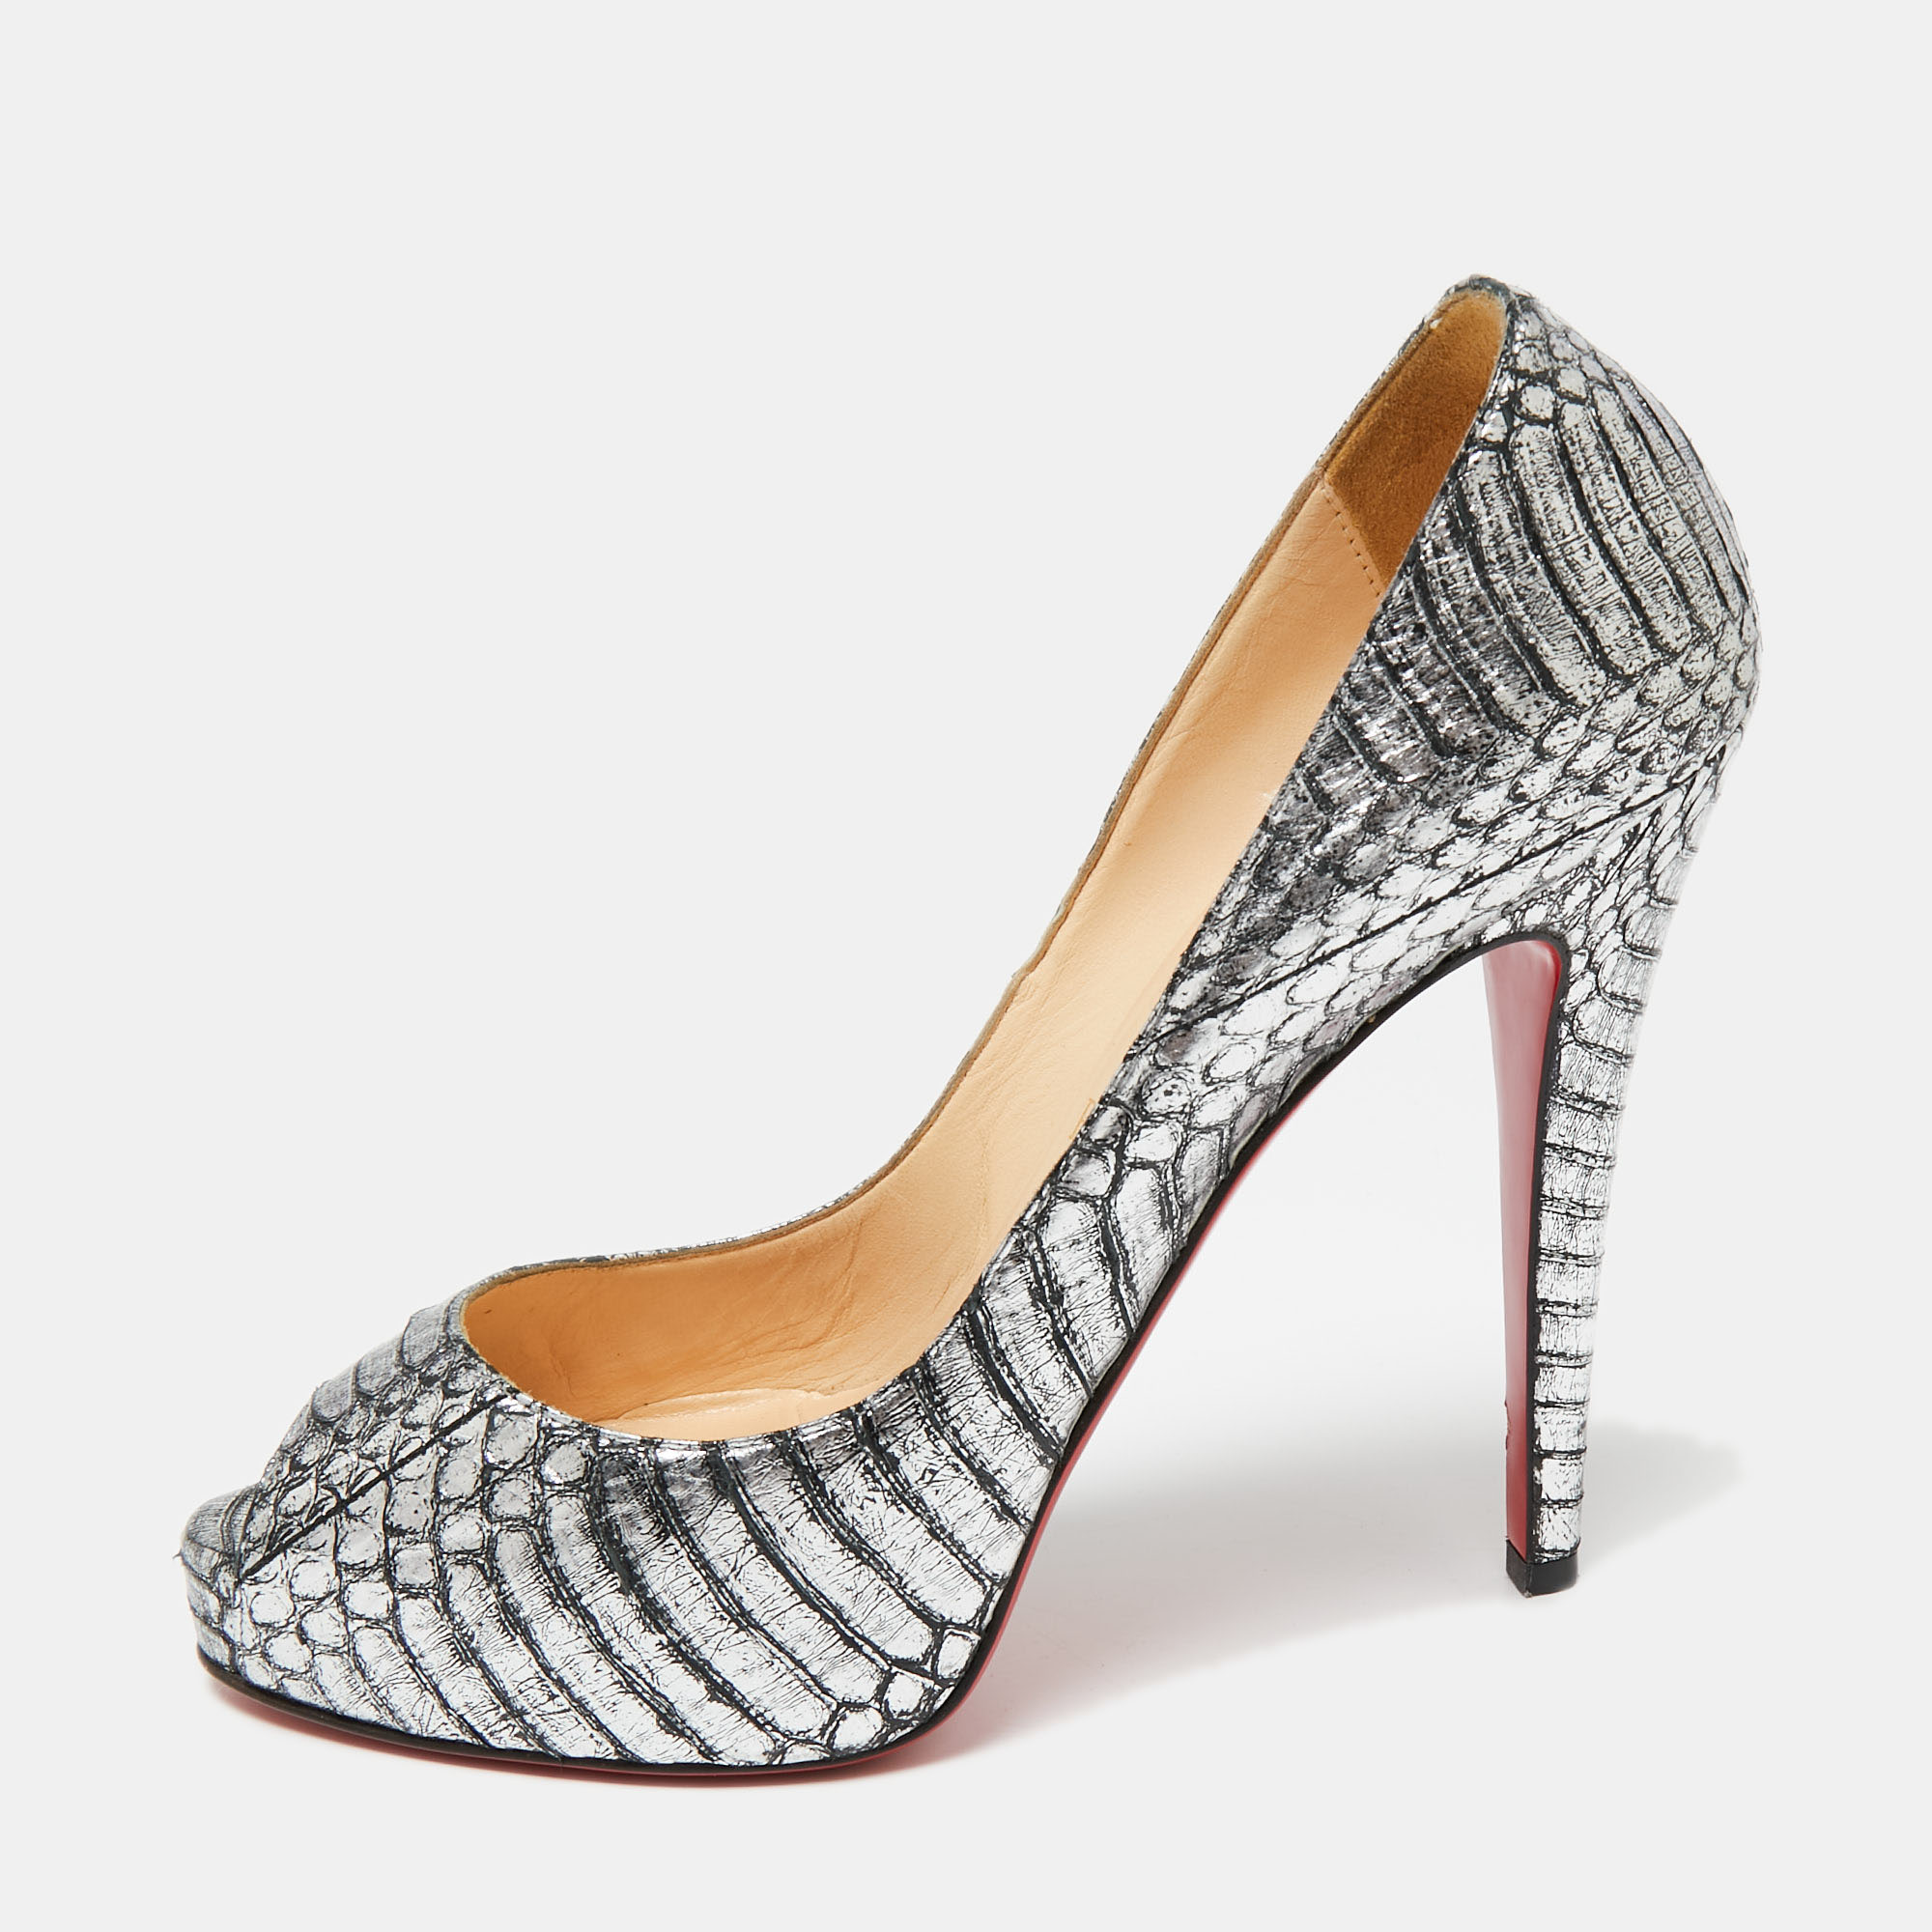 The architectural silhouette and precise cuts of this pair of pumps from Christian Louboutin exemplify the brands mastery in the art of stiletto making. Finely created from snakeskin leather it has been detailed with 12cm heels and peep toes. The signature red lacquered sole will add a touch of luxury to every step.